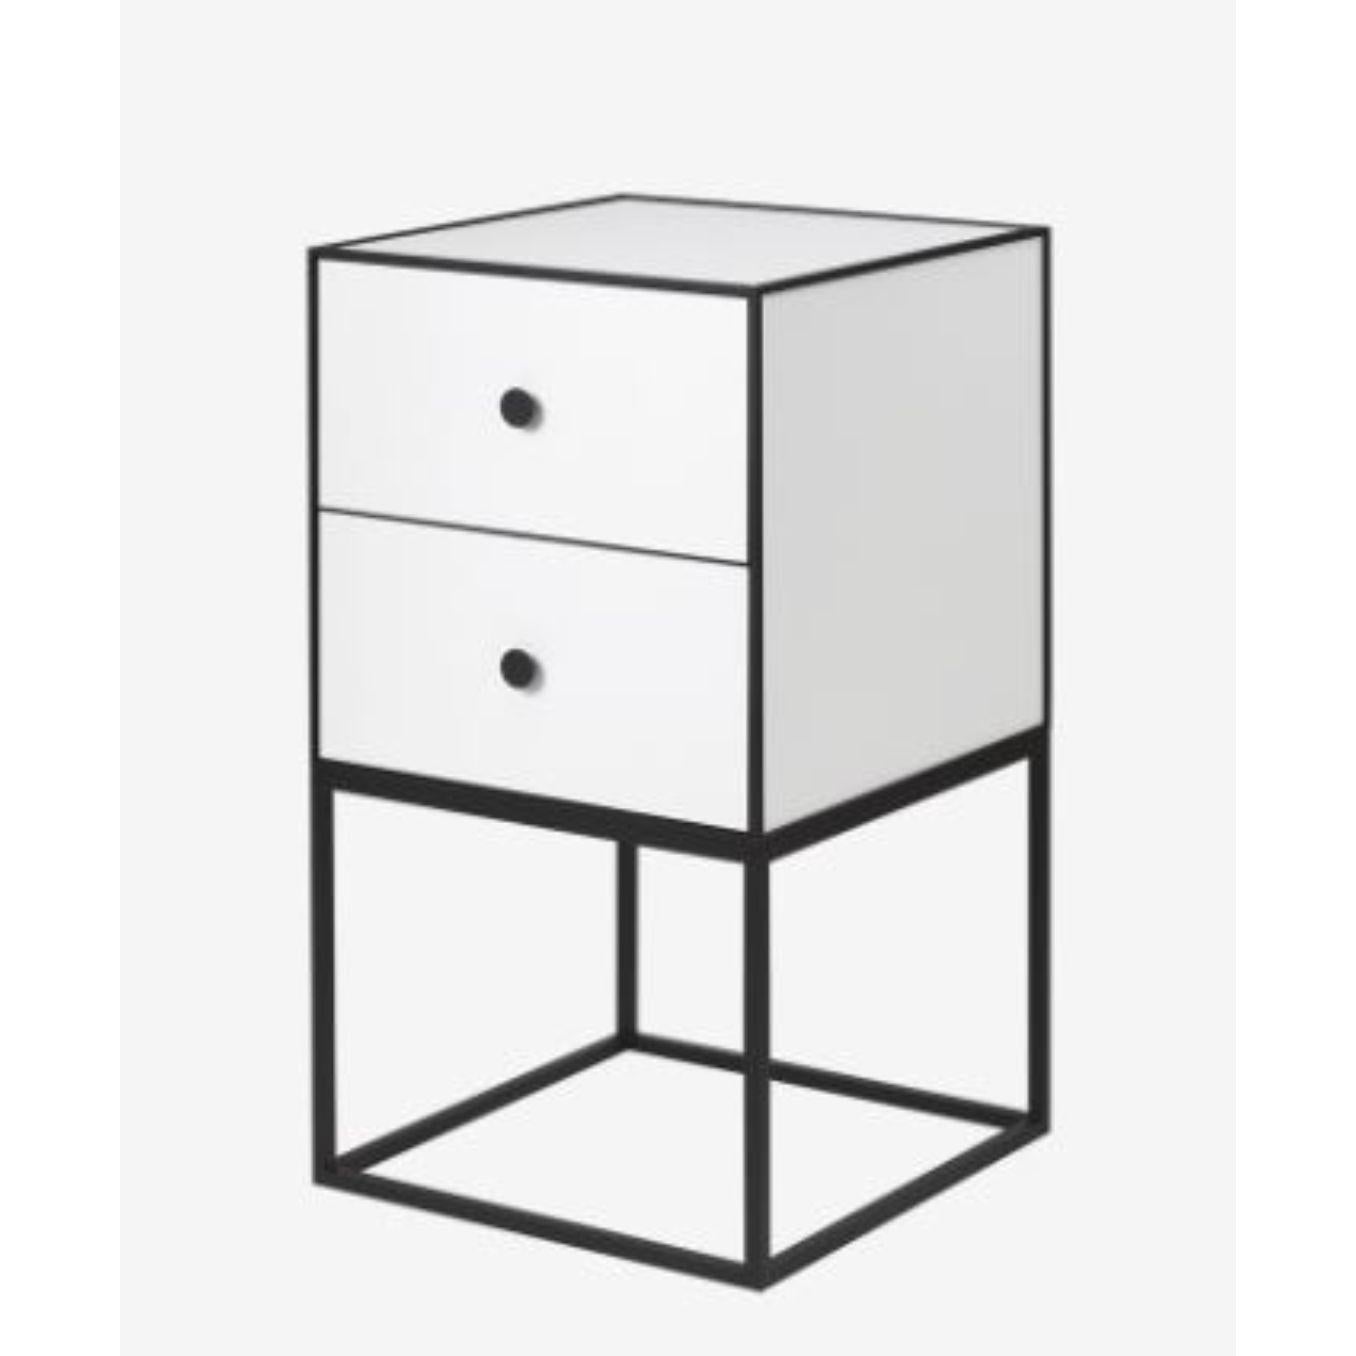 Danish 35 Black Ash Frame Sideboard with 2 Drawers by Lassen For Sale